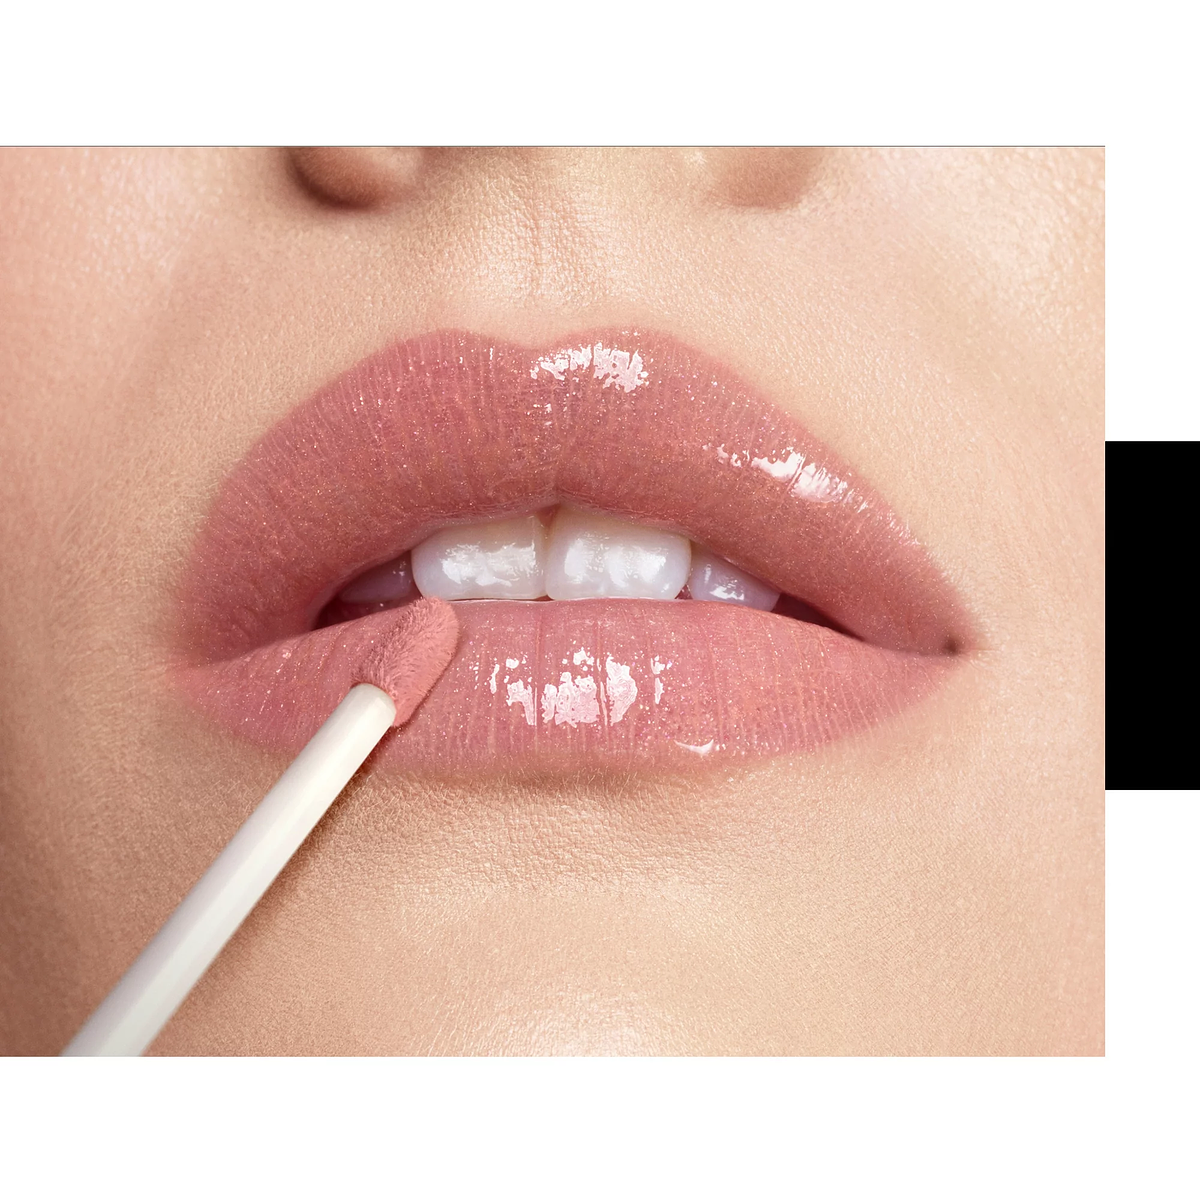 Labial Lip Gloss Exhibitionist Covergirl - 150 Tiger Eye